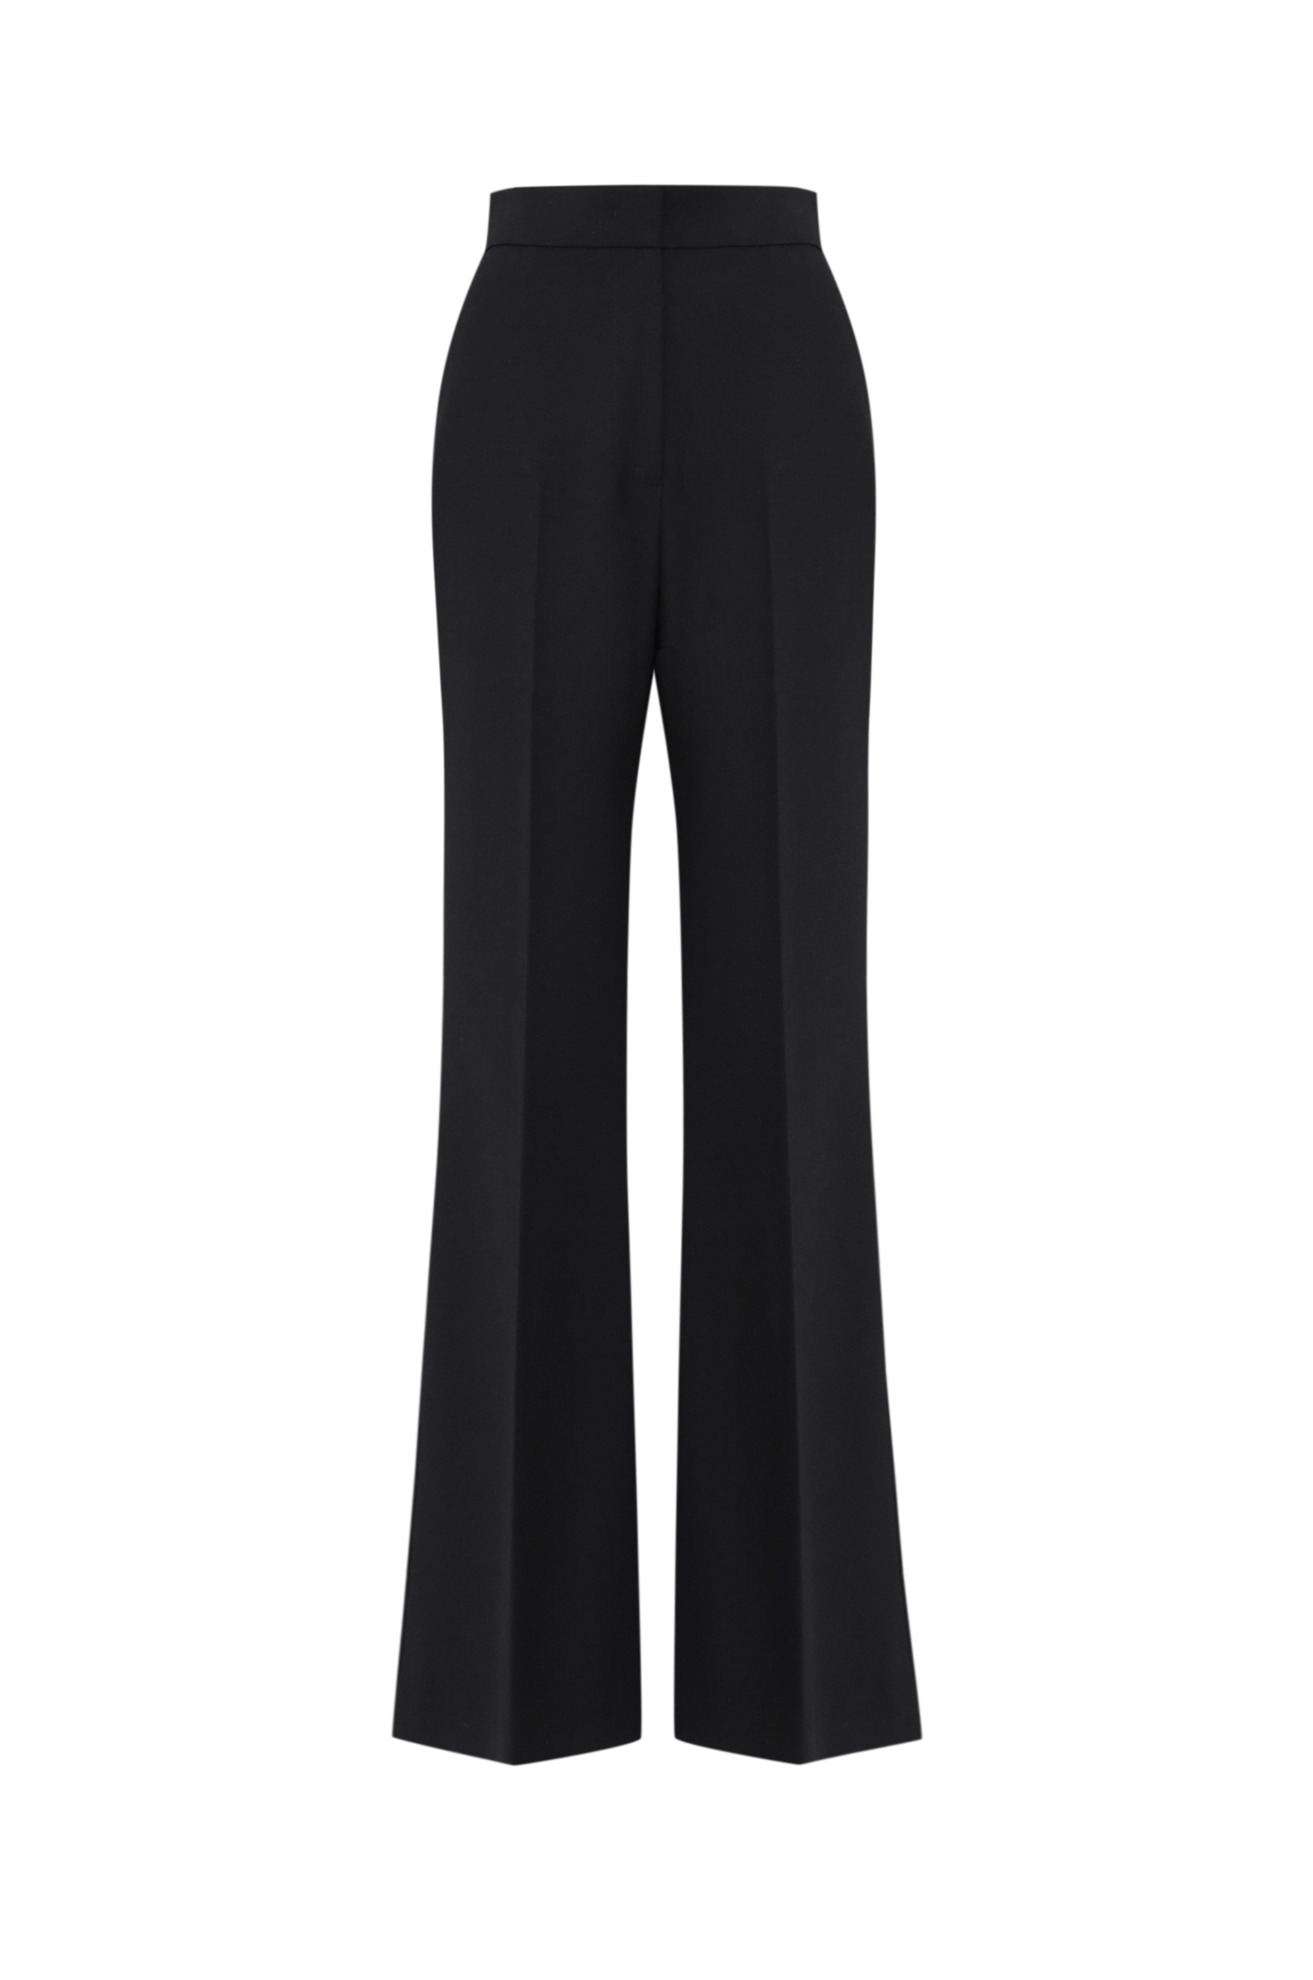 Slim Flared Trousers (Black) <br><sub><mark><strong>ATELIER EDITION </strong></sub><br>